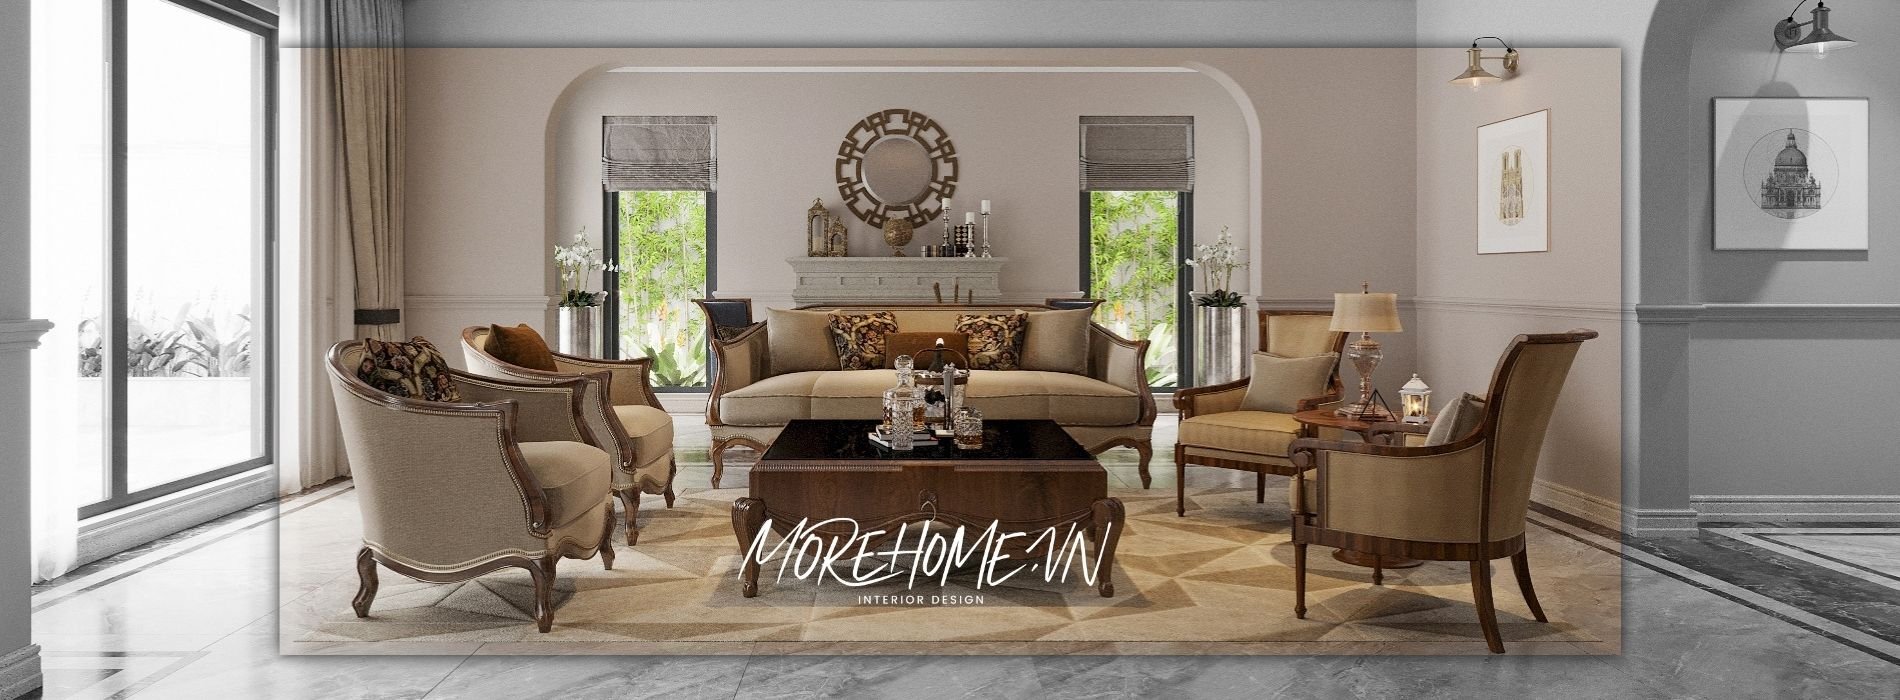 thiết kế nội thất Morehome